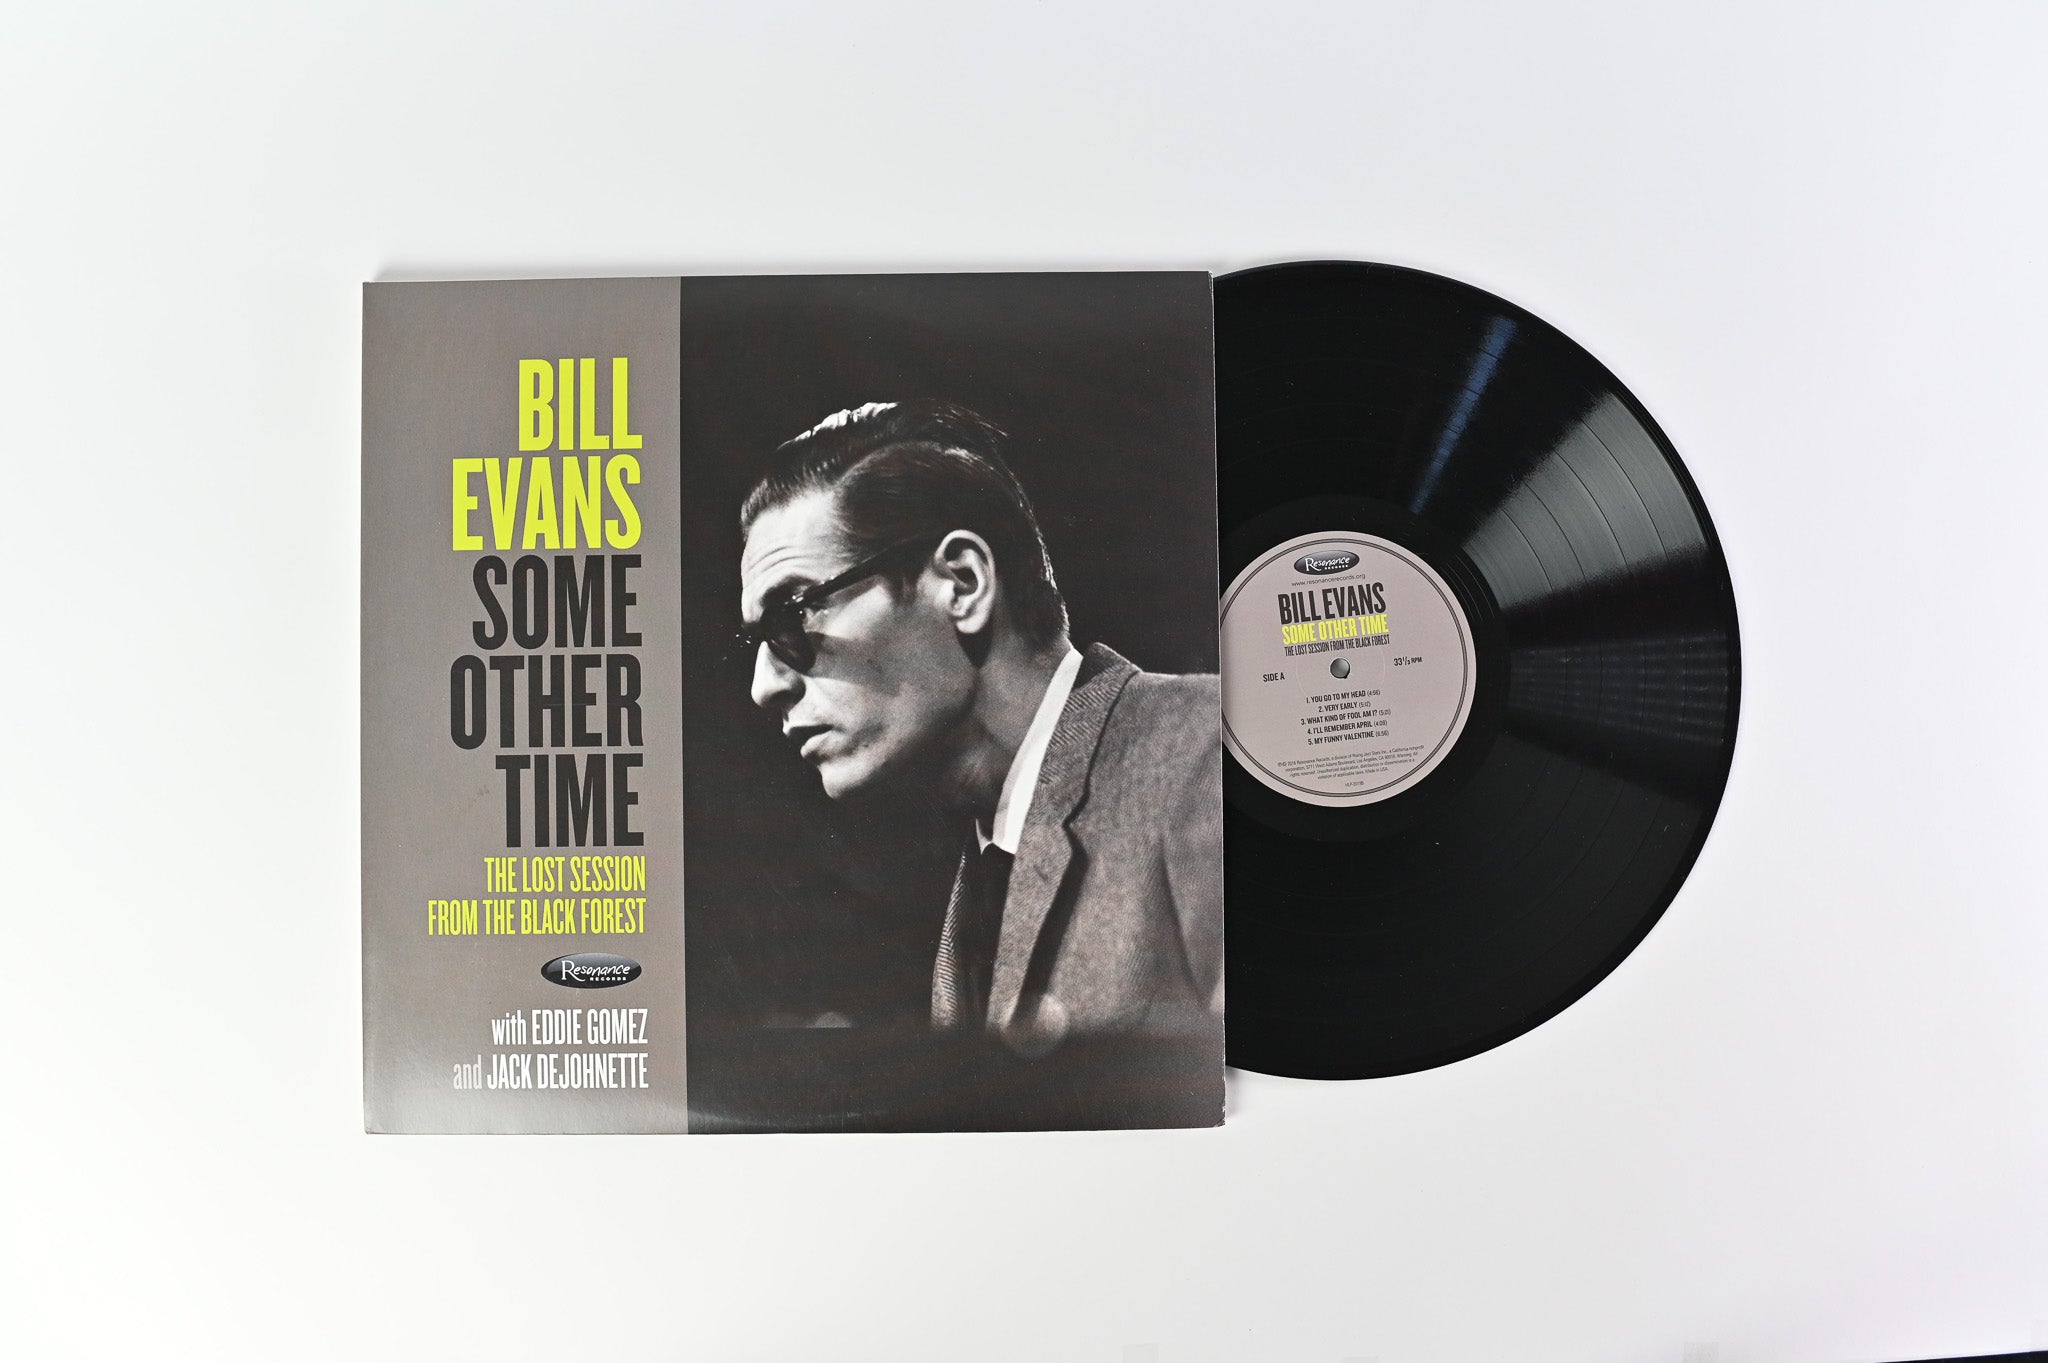 Bill Evans - Some Other Time (The Lost Session From The Black Forest) on Resonance Records